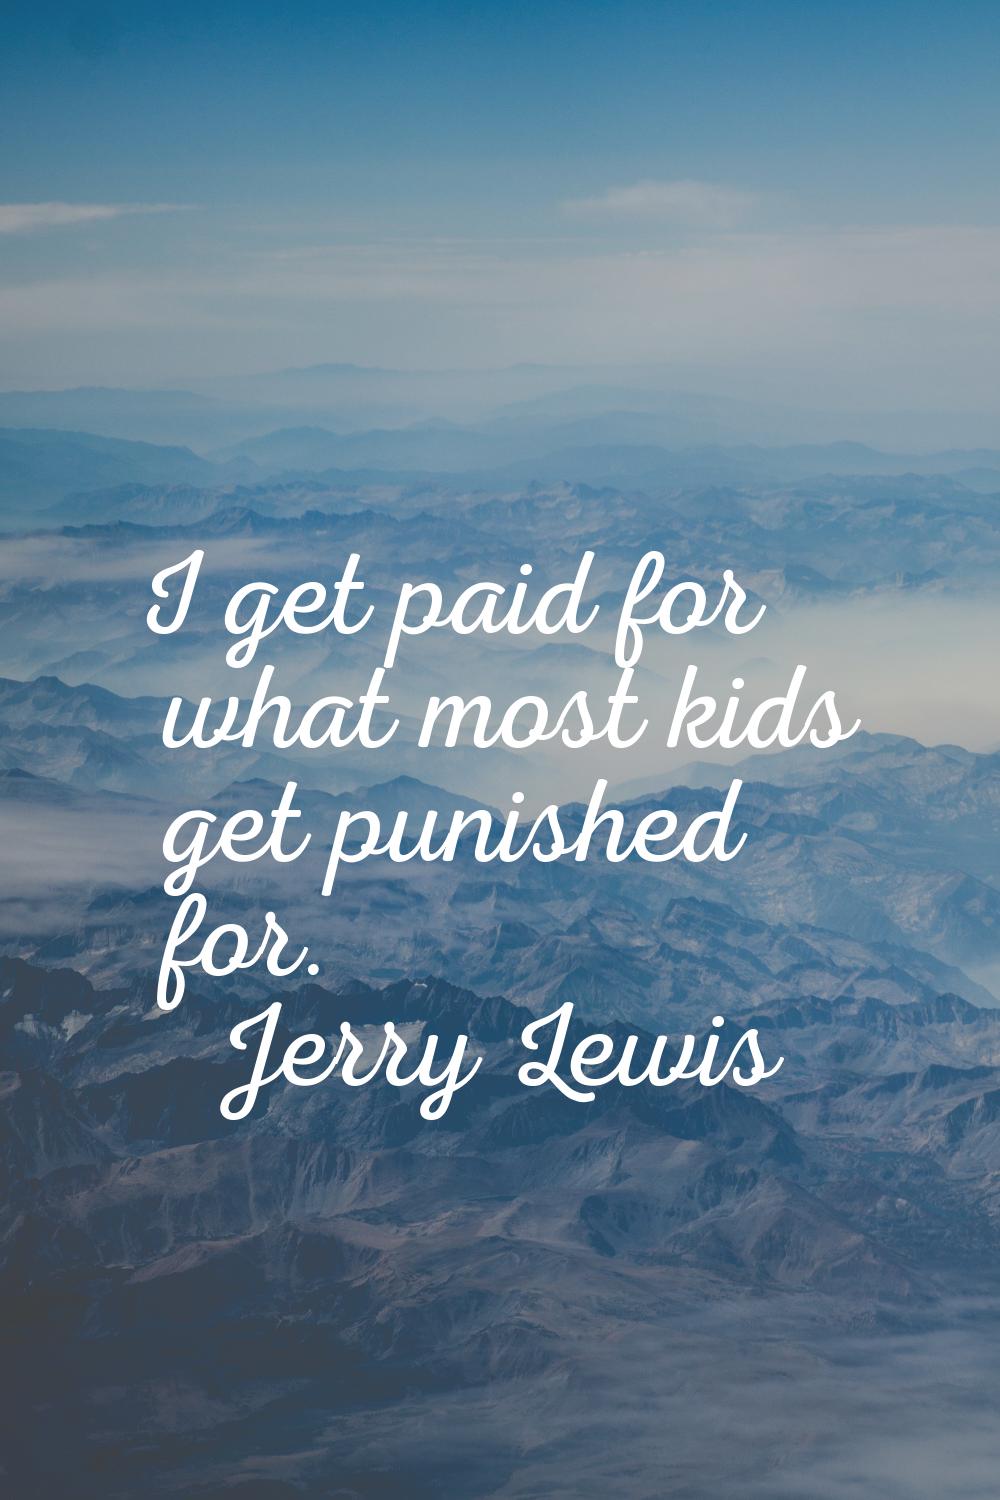 I get paid for what most kids get punished for.